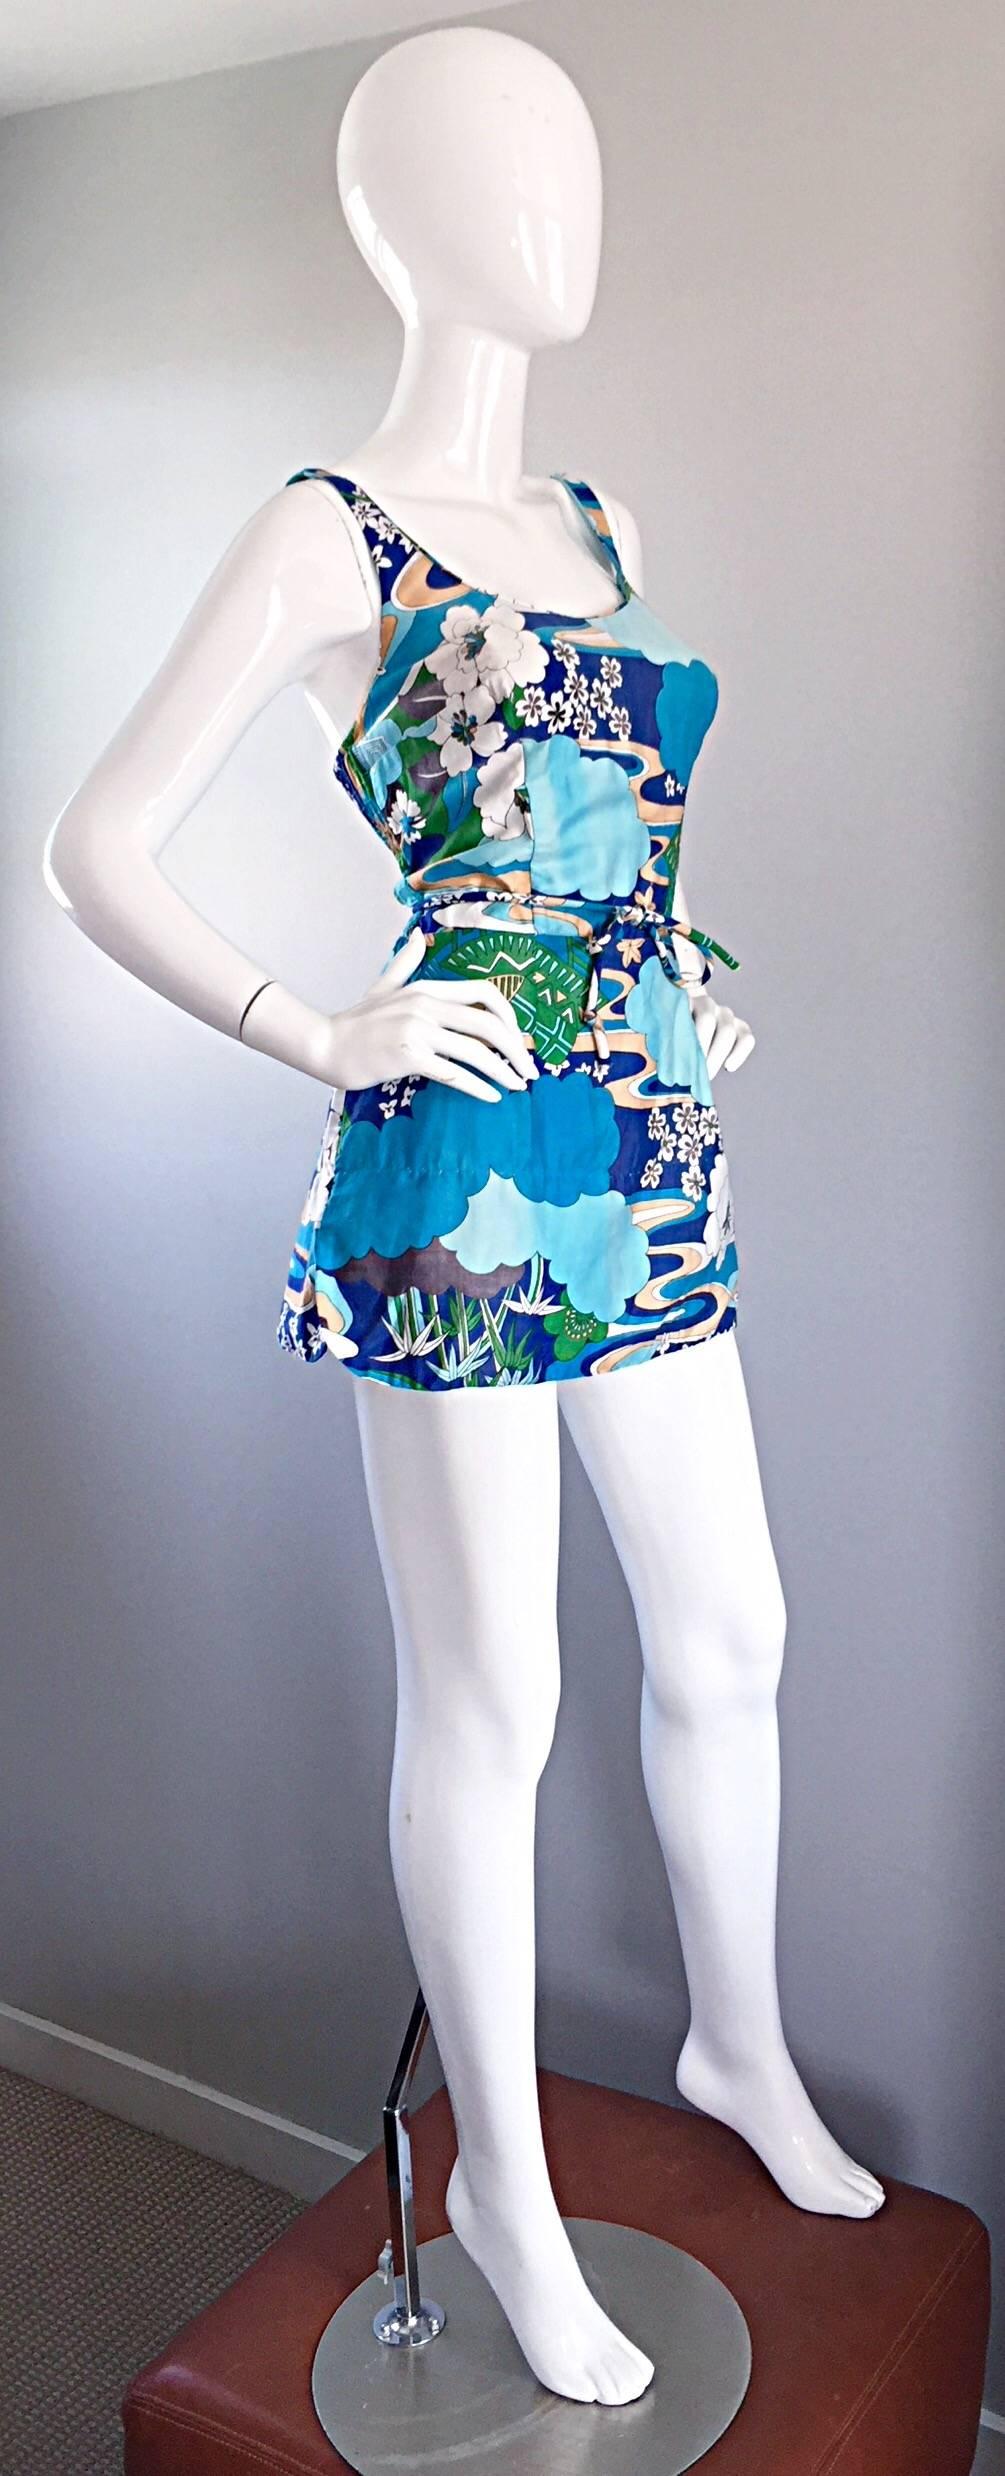 1960s Romper Swimsuit Onesie w/ Chineese Themed Print By Roxanne Perfection Fit 1